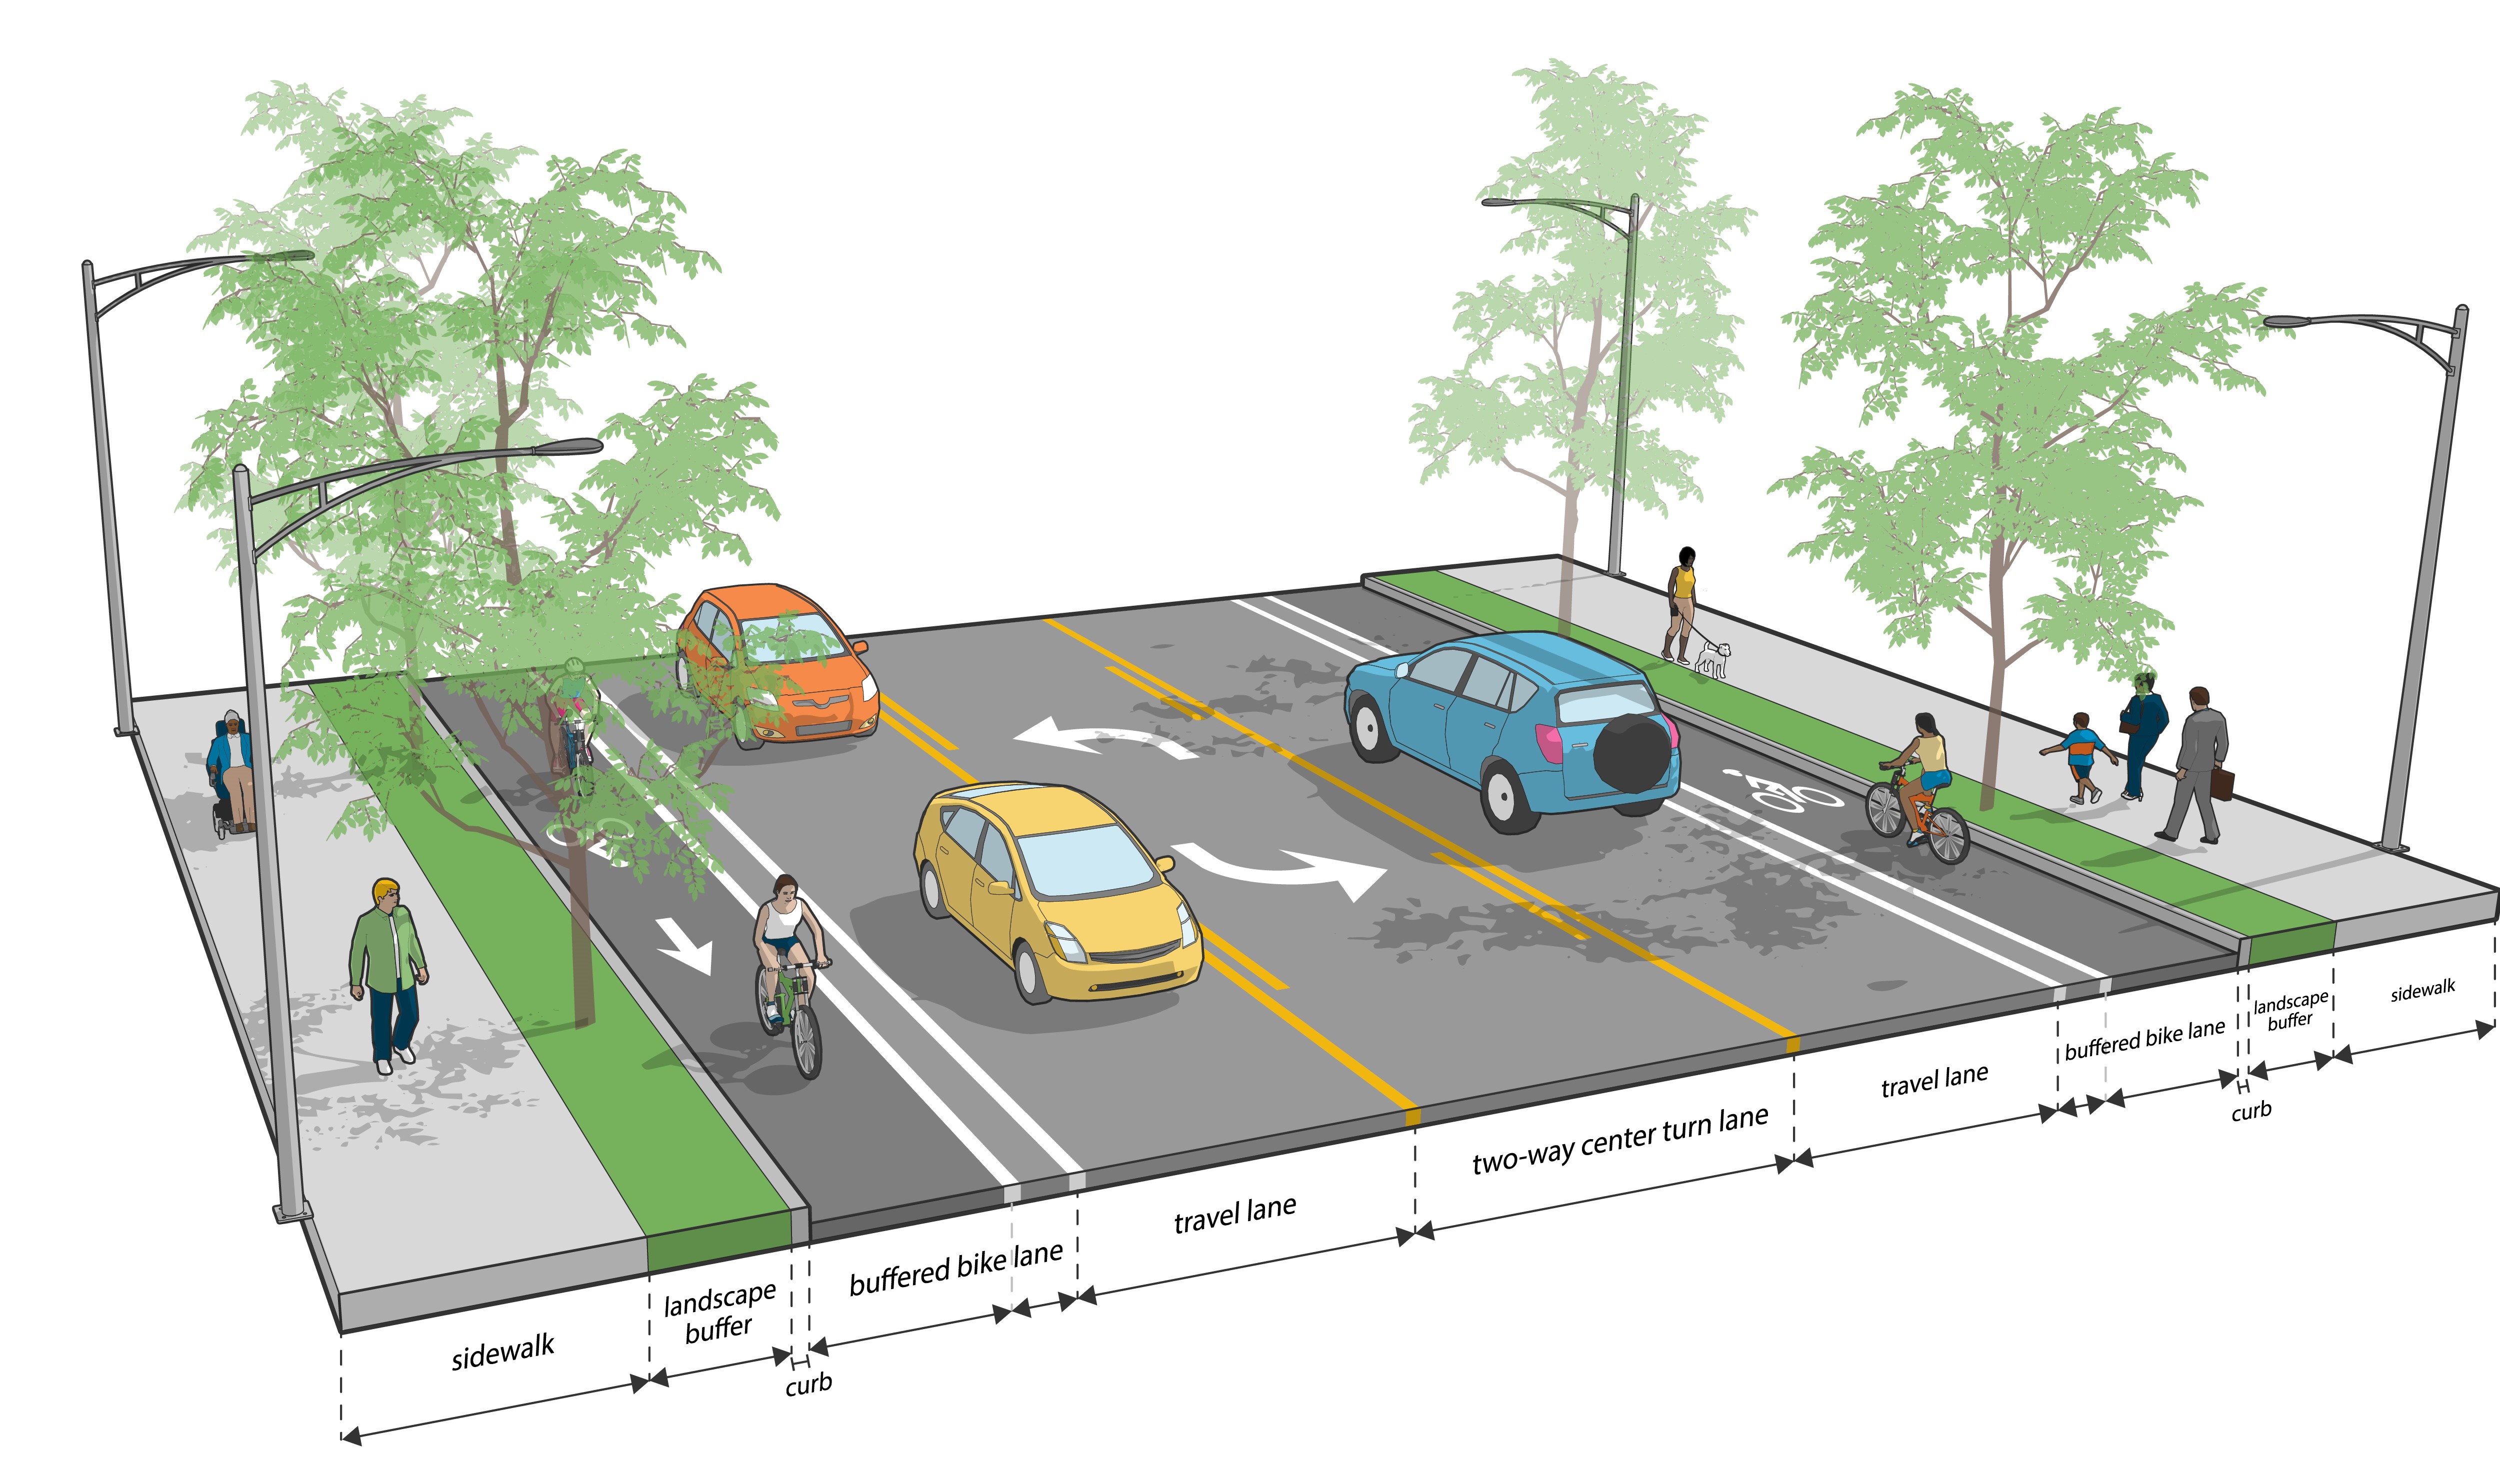 An example cross section showing the new bike lanes, sidewalk and center turn lane that will be built in the Outer Powell projec